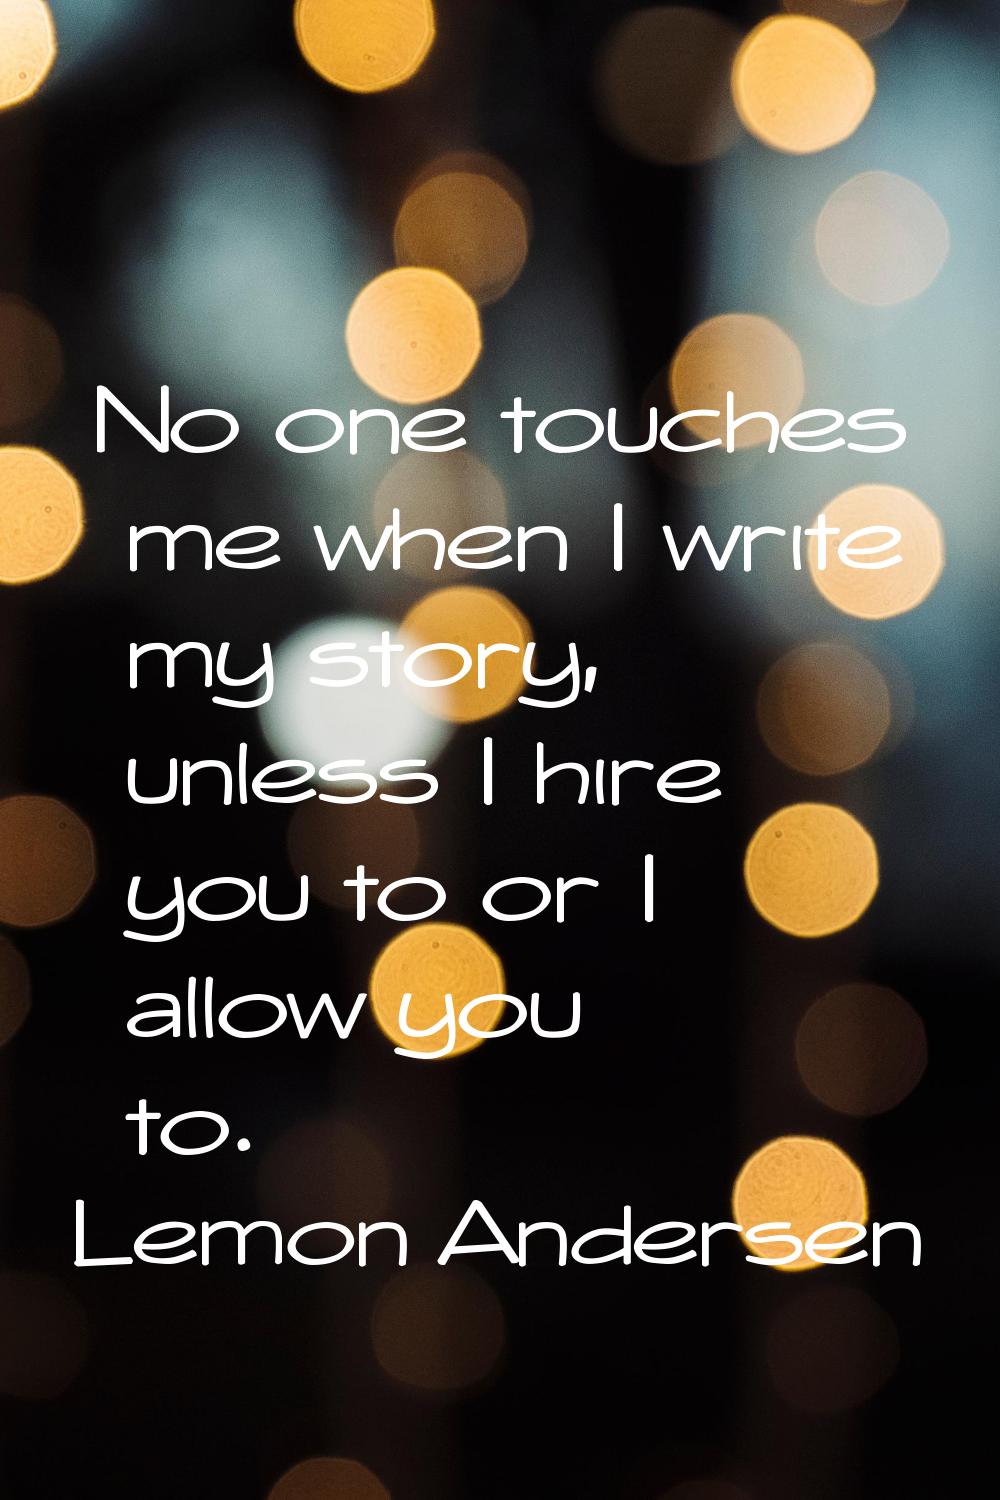 No one touches me when I write my story, unless I hire you to or I allow you to.